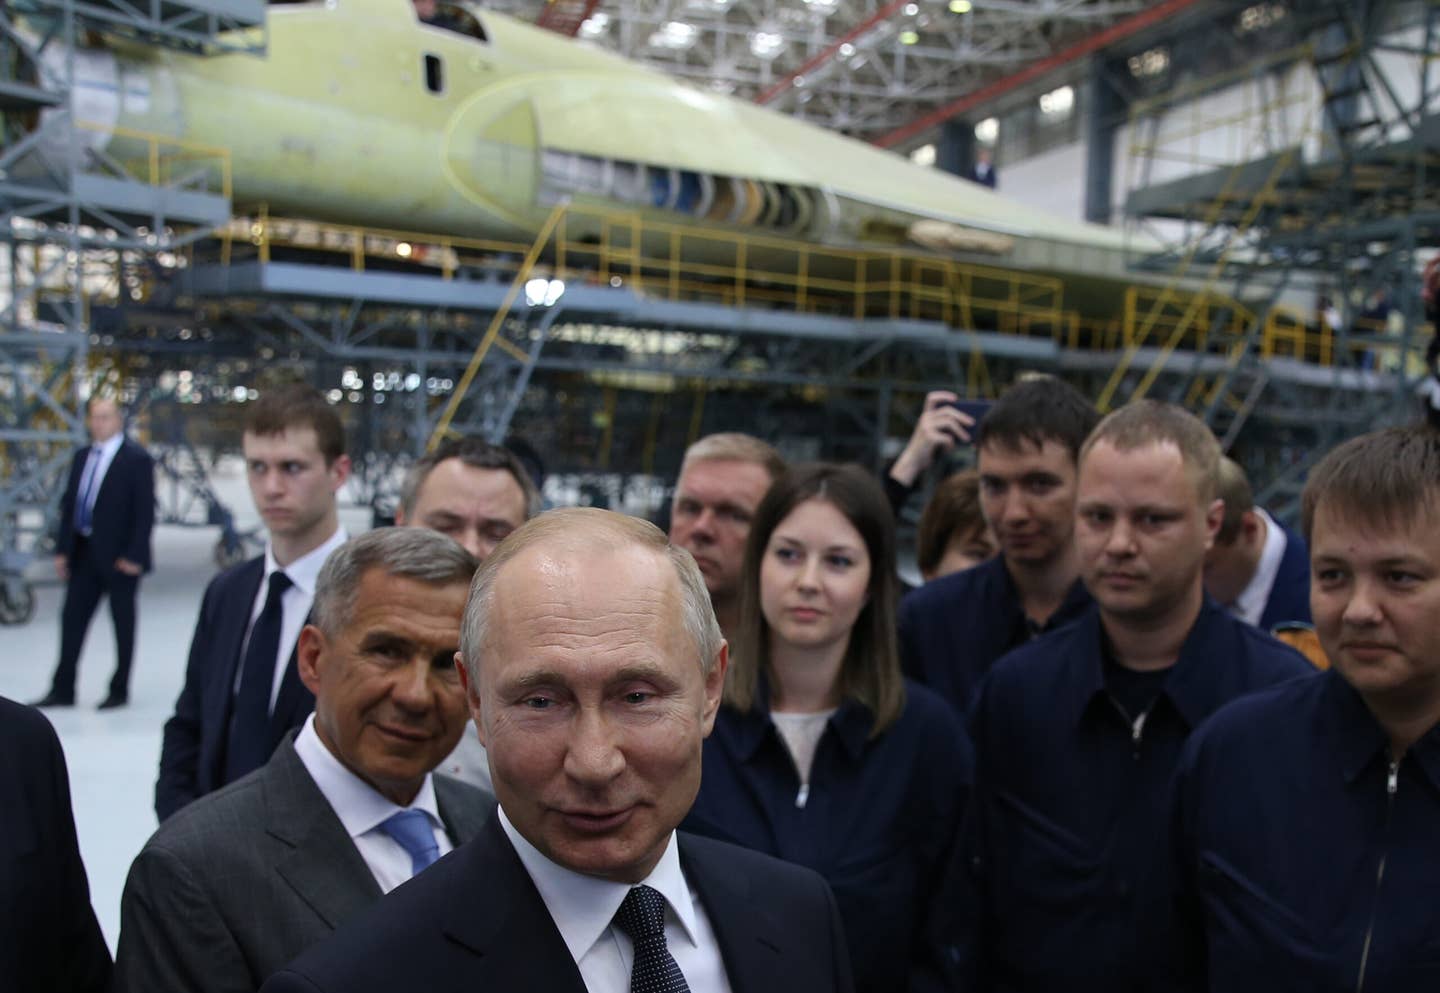 Russian President Vladimir Putin talks to workers during a visit to the Kazan Aircraft Production Association on May 13, 2019, in Kazan, Russia. <em>Photo by Mikhail Svetlov/Getty Images</em>